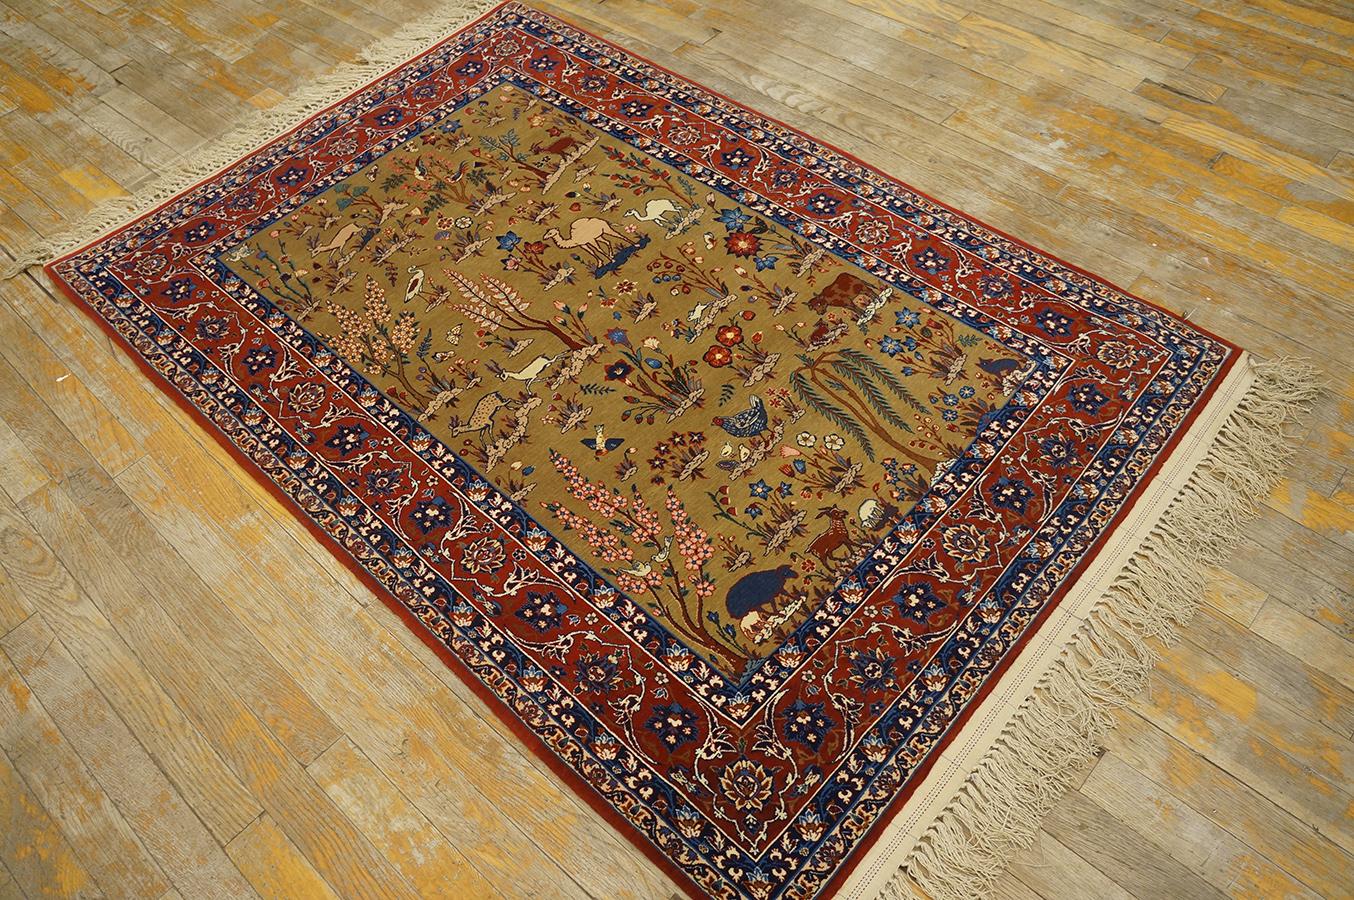 1930s Persian Isfahan Carpet ( 3' 4'' x 5' 2'' - 102 x 157 cm ) In Good Condition For Sale In New York, NY